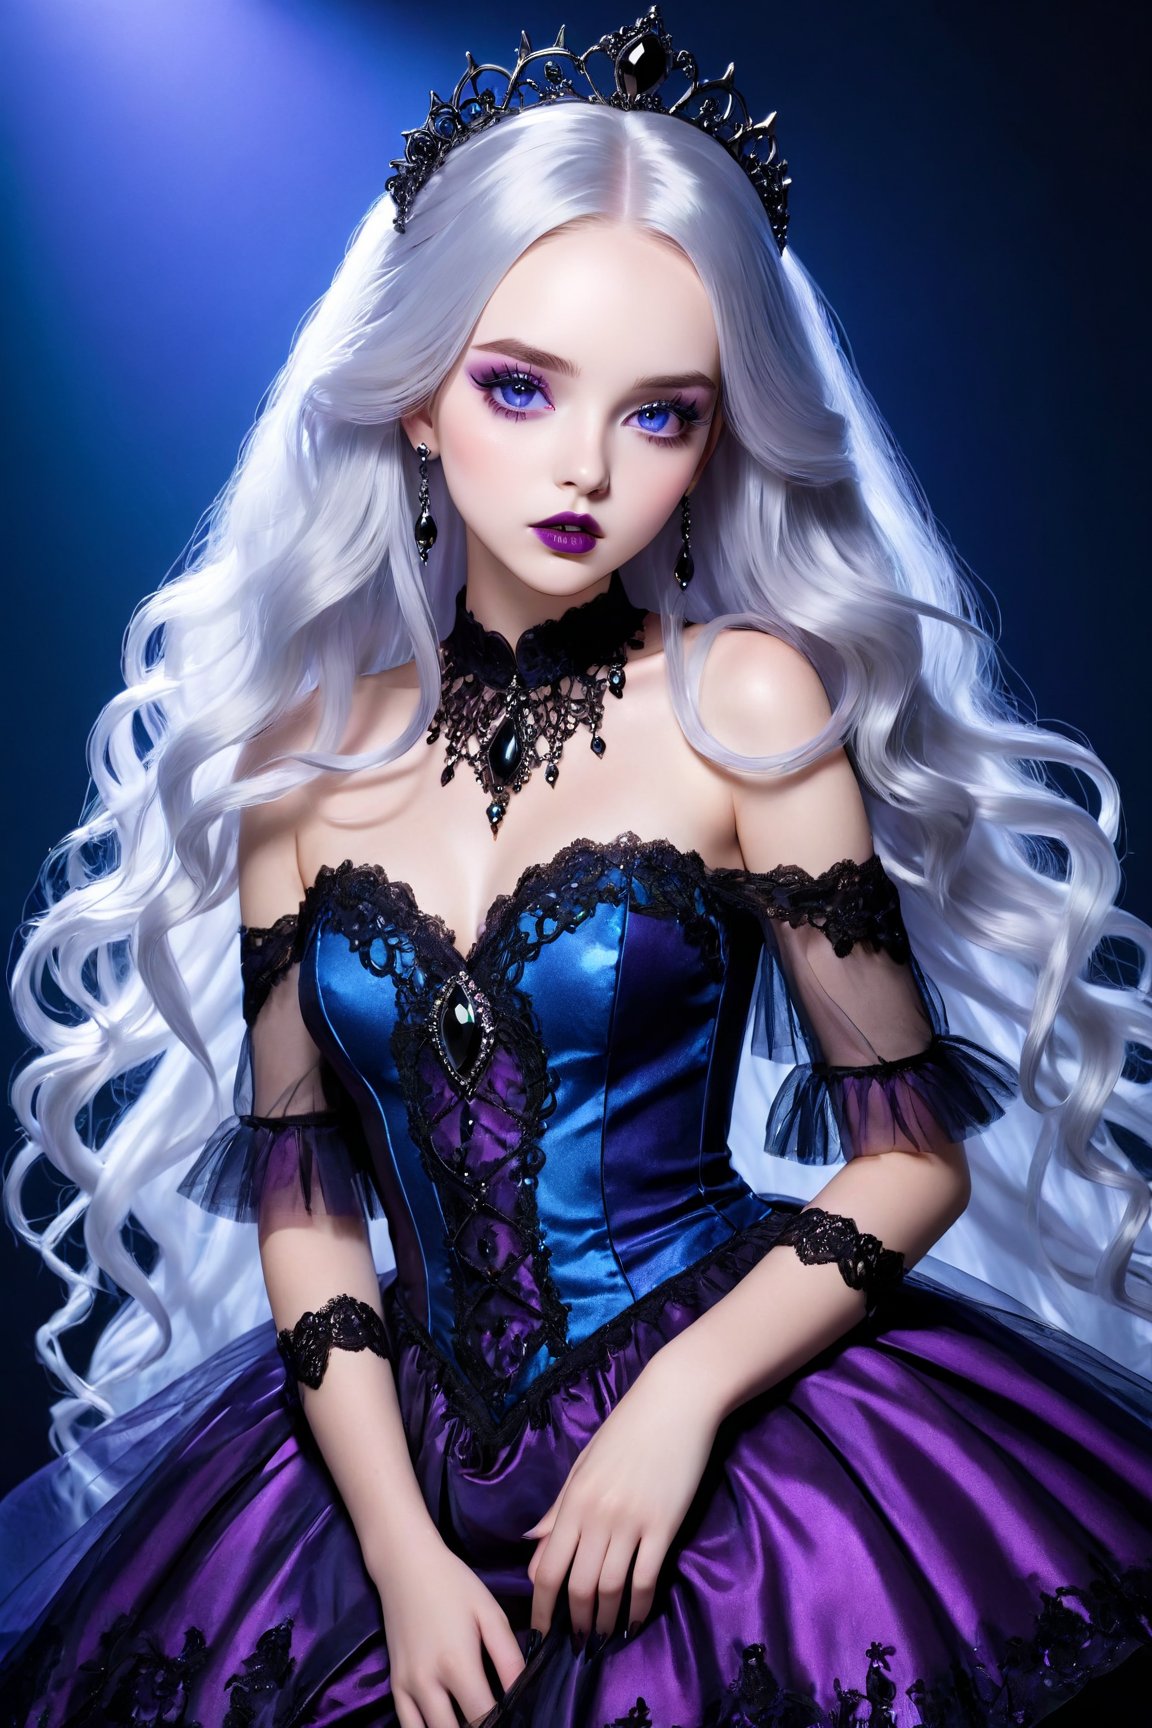 (best quality, photorealistic, high fashion, high detailed, high light), (glossy magazine photo:1.2), (young British woman:1.3), (posing for magazine:1.2), (gothic style:1.3), (long silver hair:1.2), (tulle-lace purple dress:1.3), (decorated with black diamonds:1.3), (full lips:1.2), (big ocean blue eyes:1.3), (metallic gothic makeup:1.3), (bright studio lights:1.3).